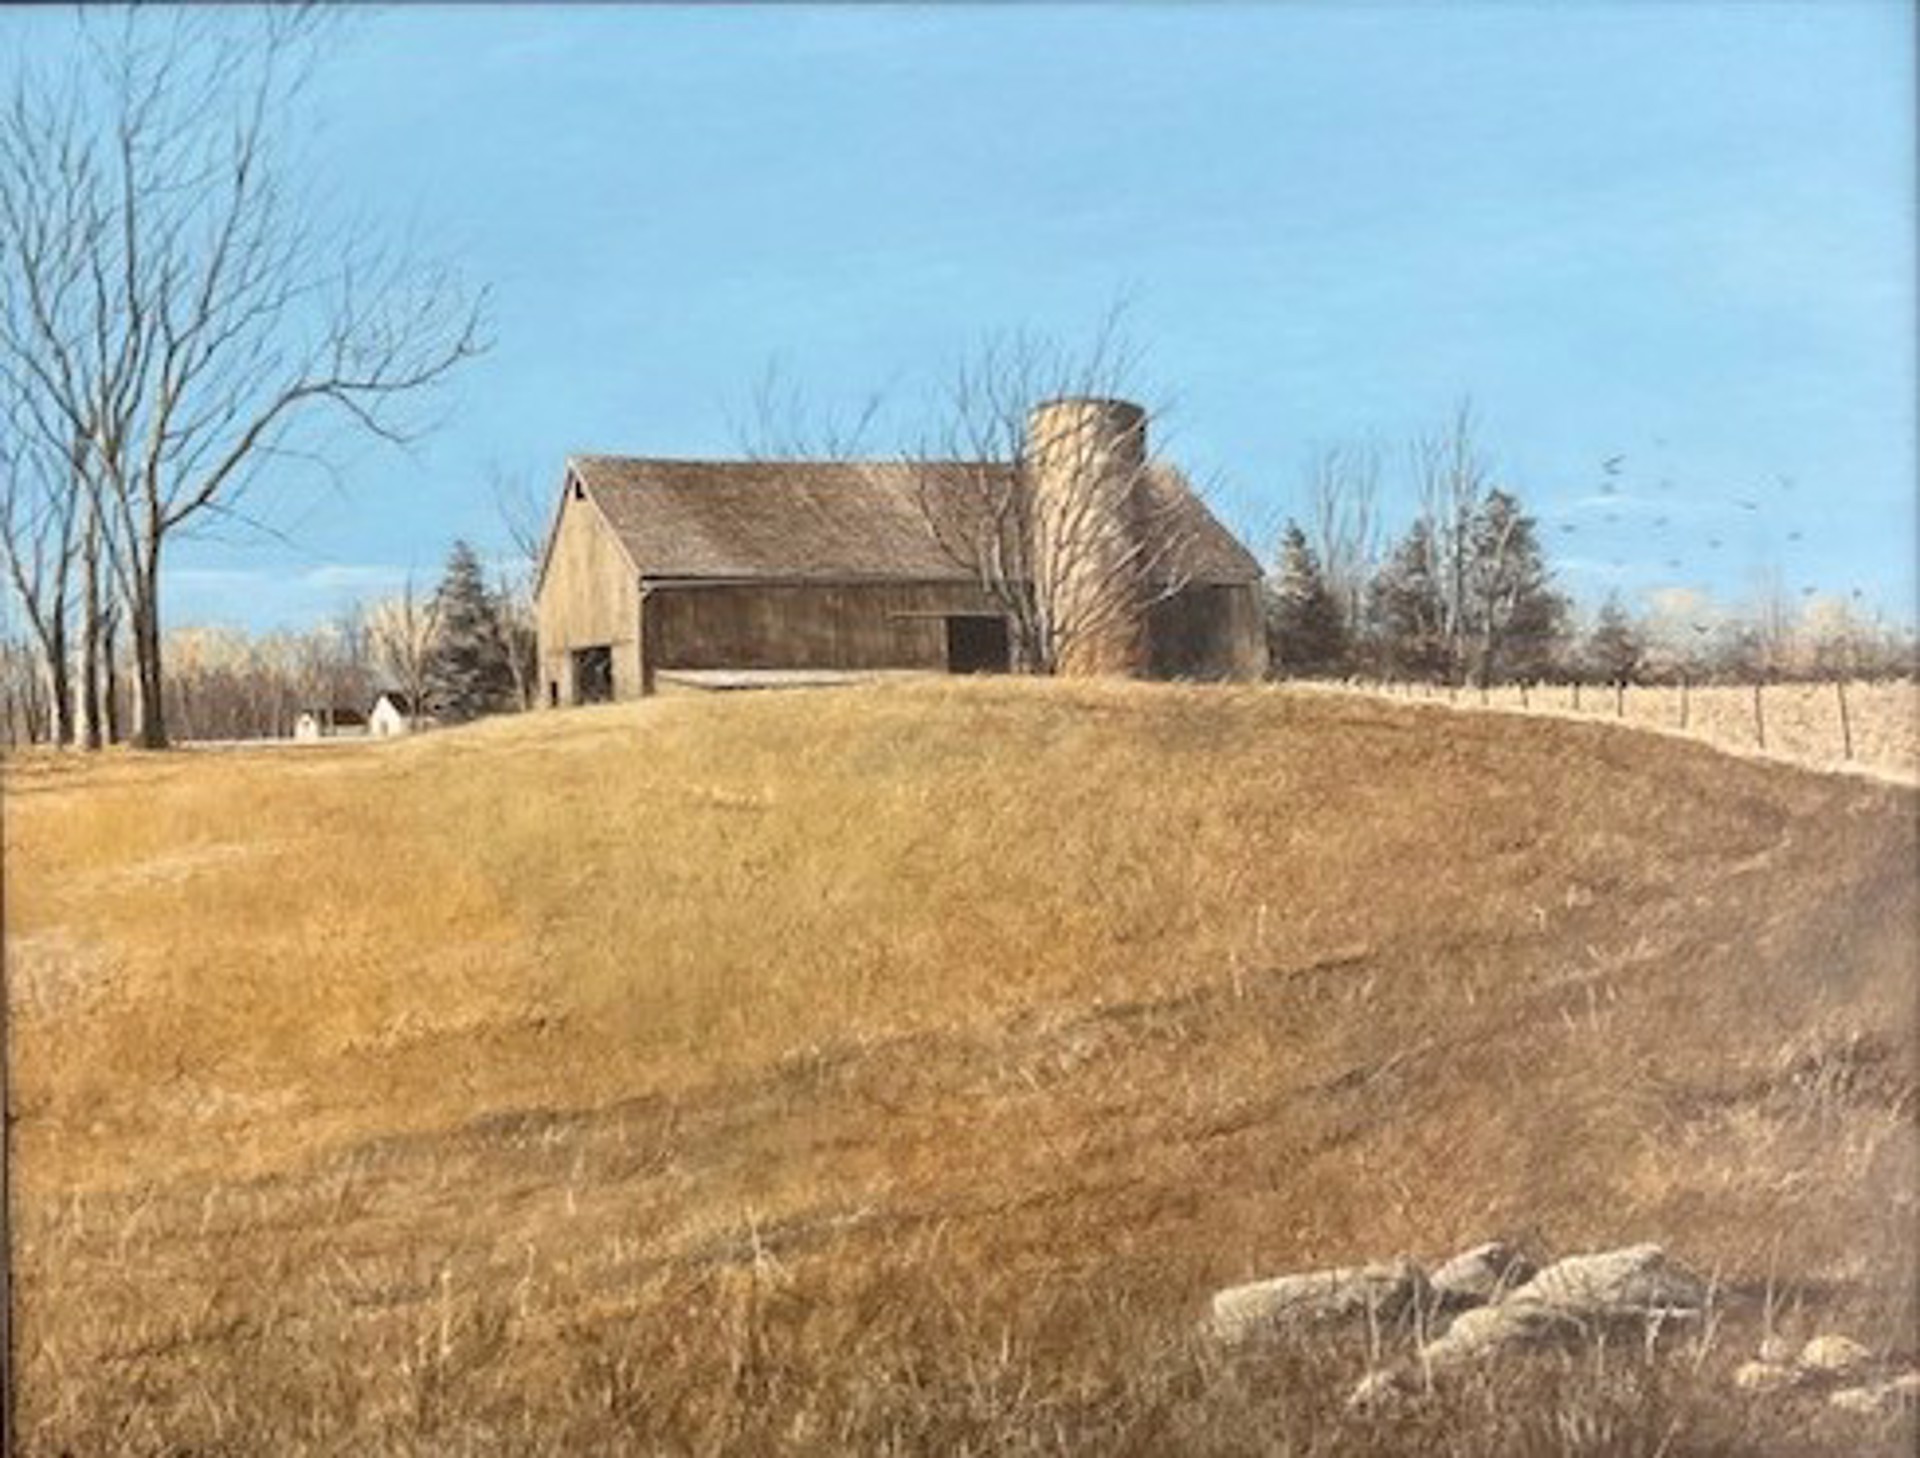 The Hill Barn by Roger Blair